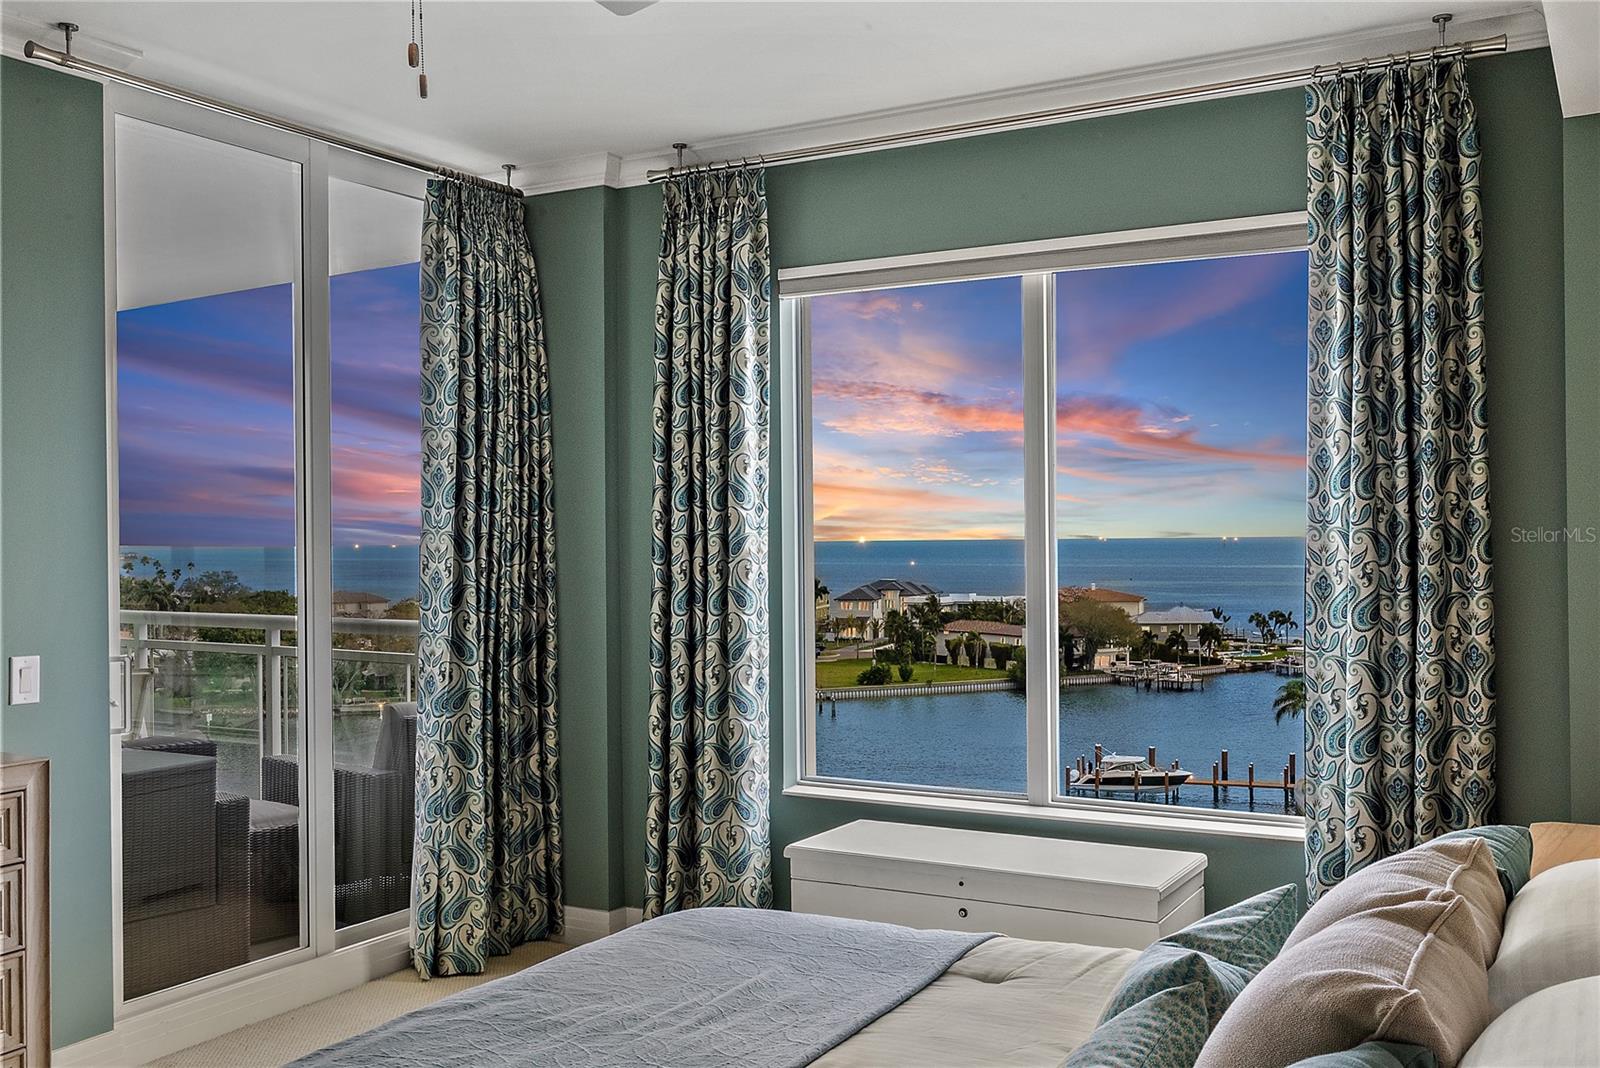 Tranquil Primary Suite with spectacular water views and sunrises. Floor to ceiling sliding glass doors open to private balcony.